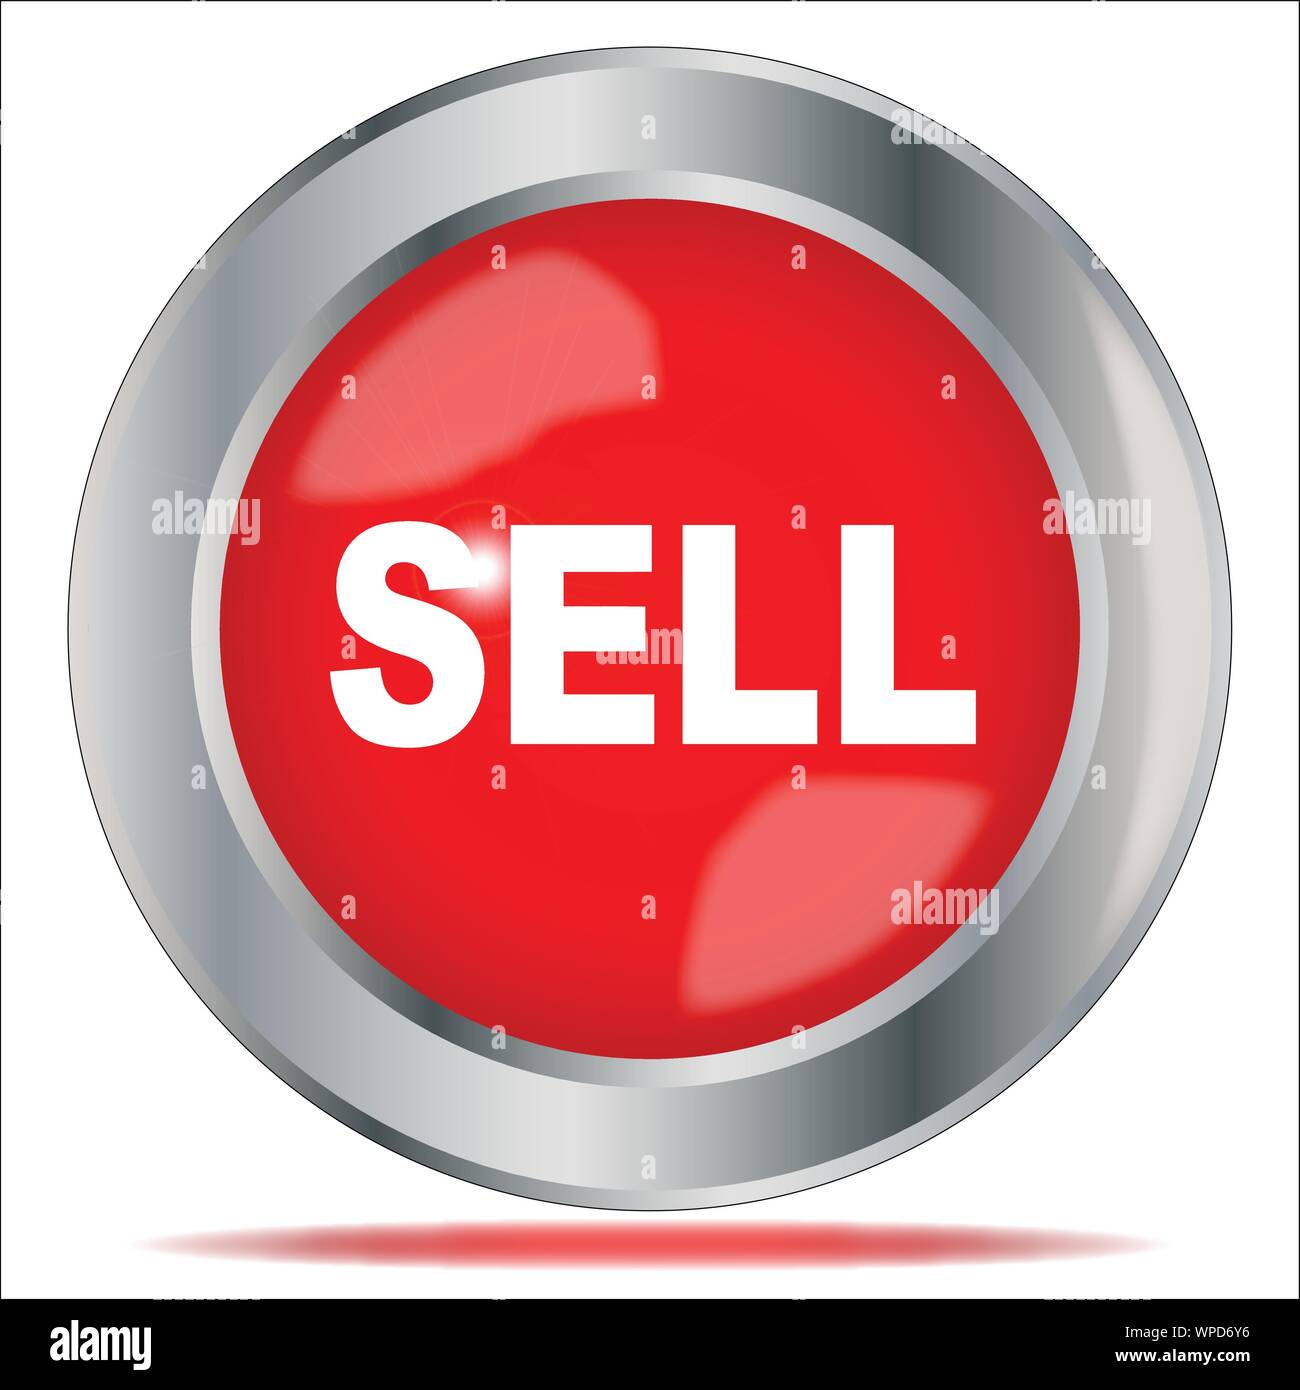 Sell Stock Vector